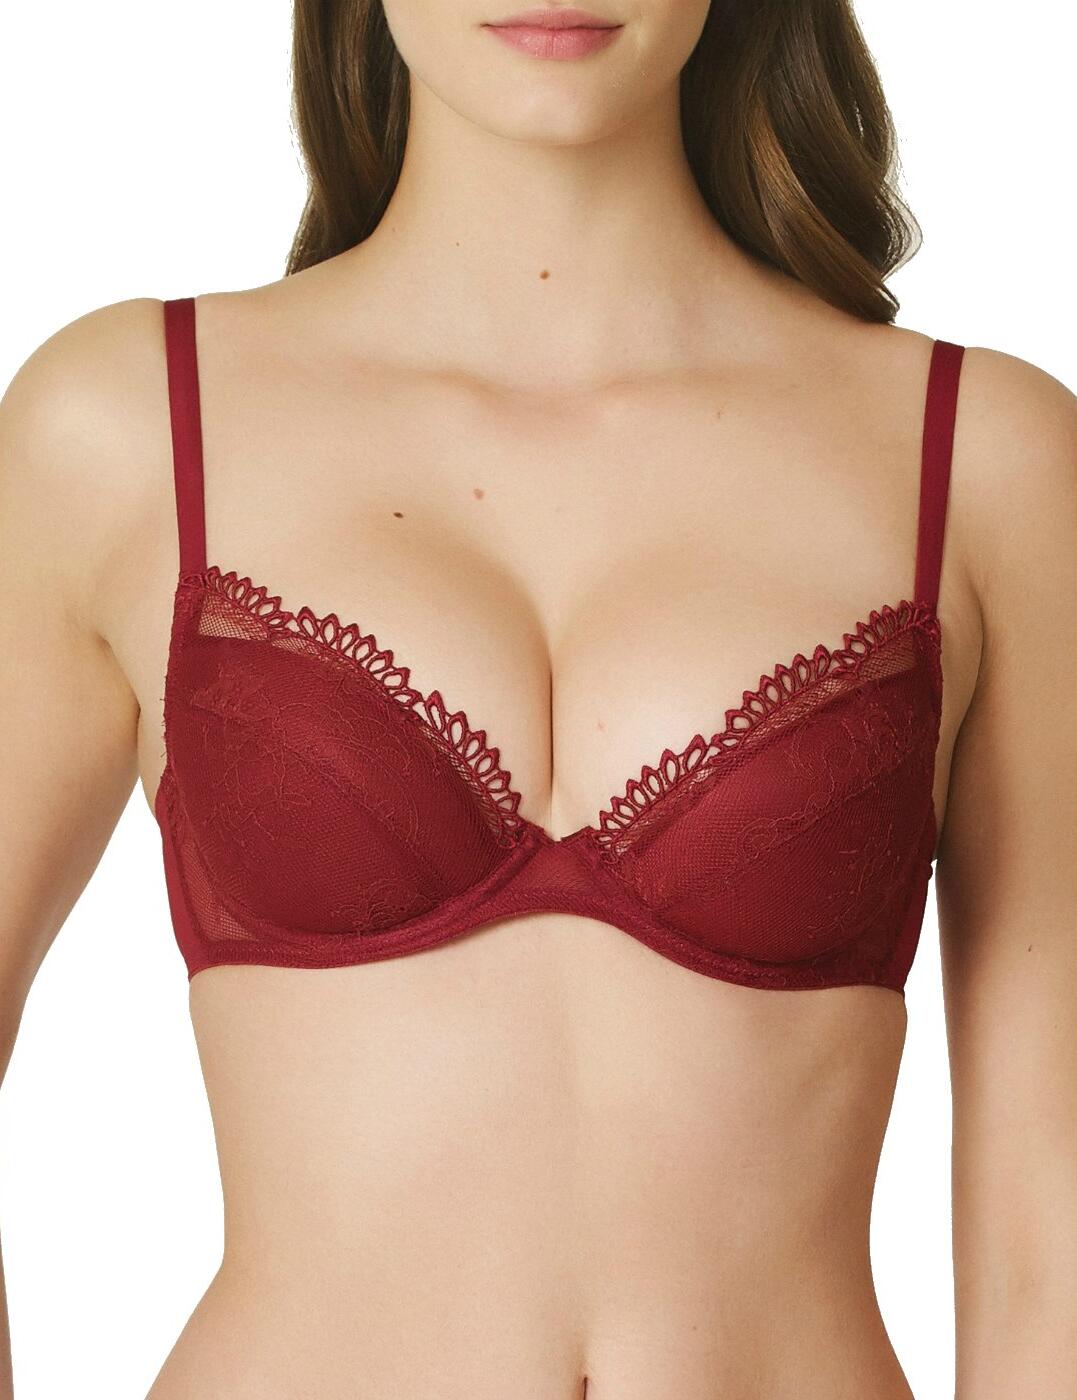 Push-up bra with removable padding